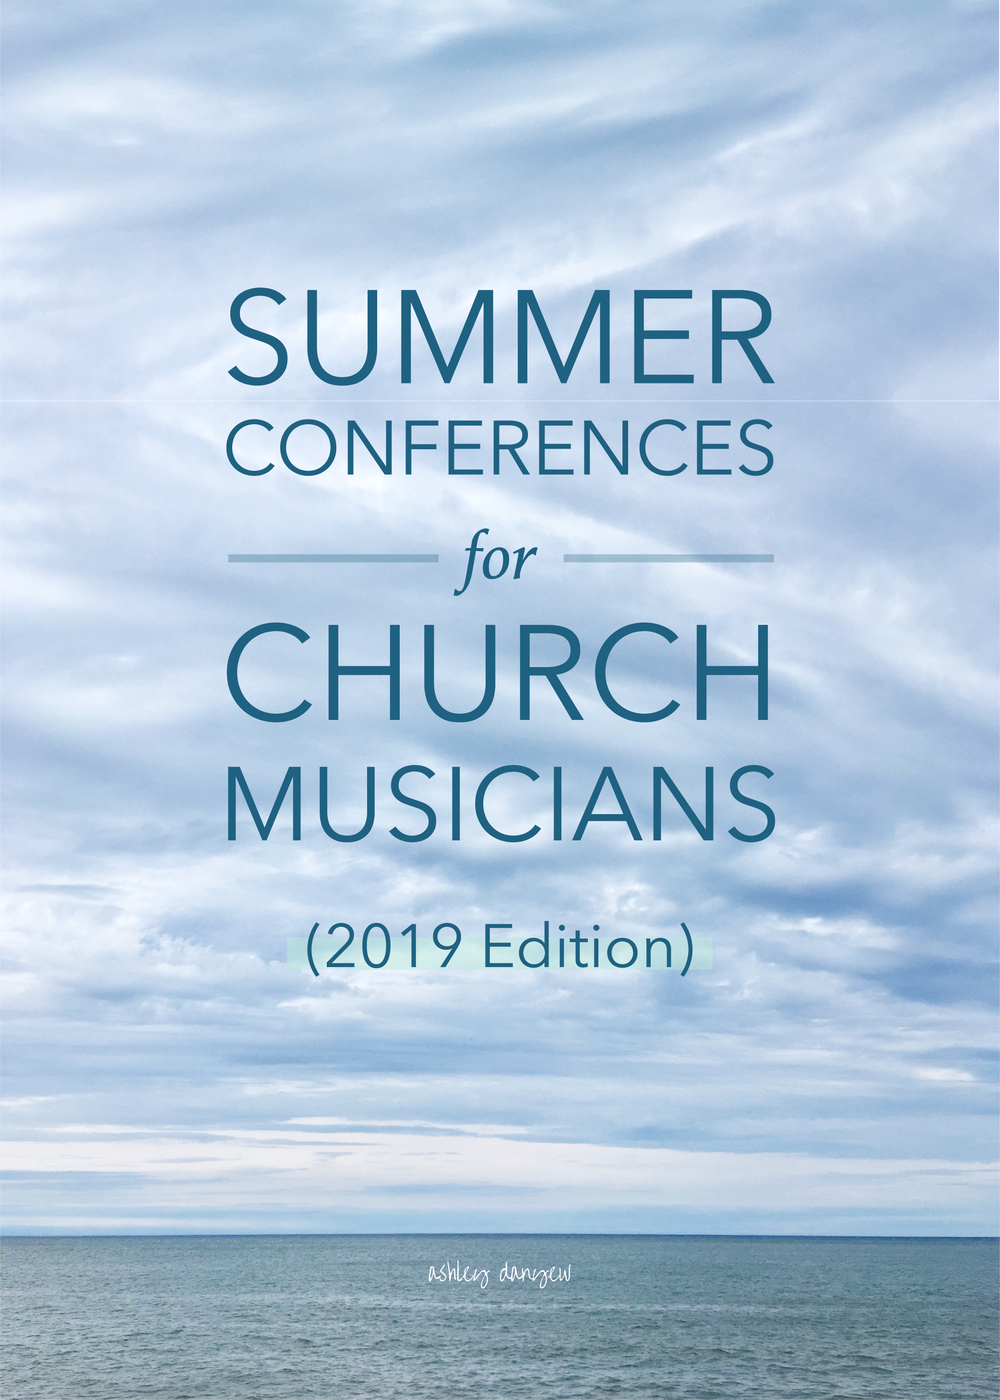 Summer Conferences for Church Musicians (2019 Edition)-16.png